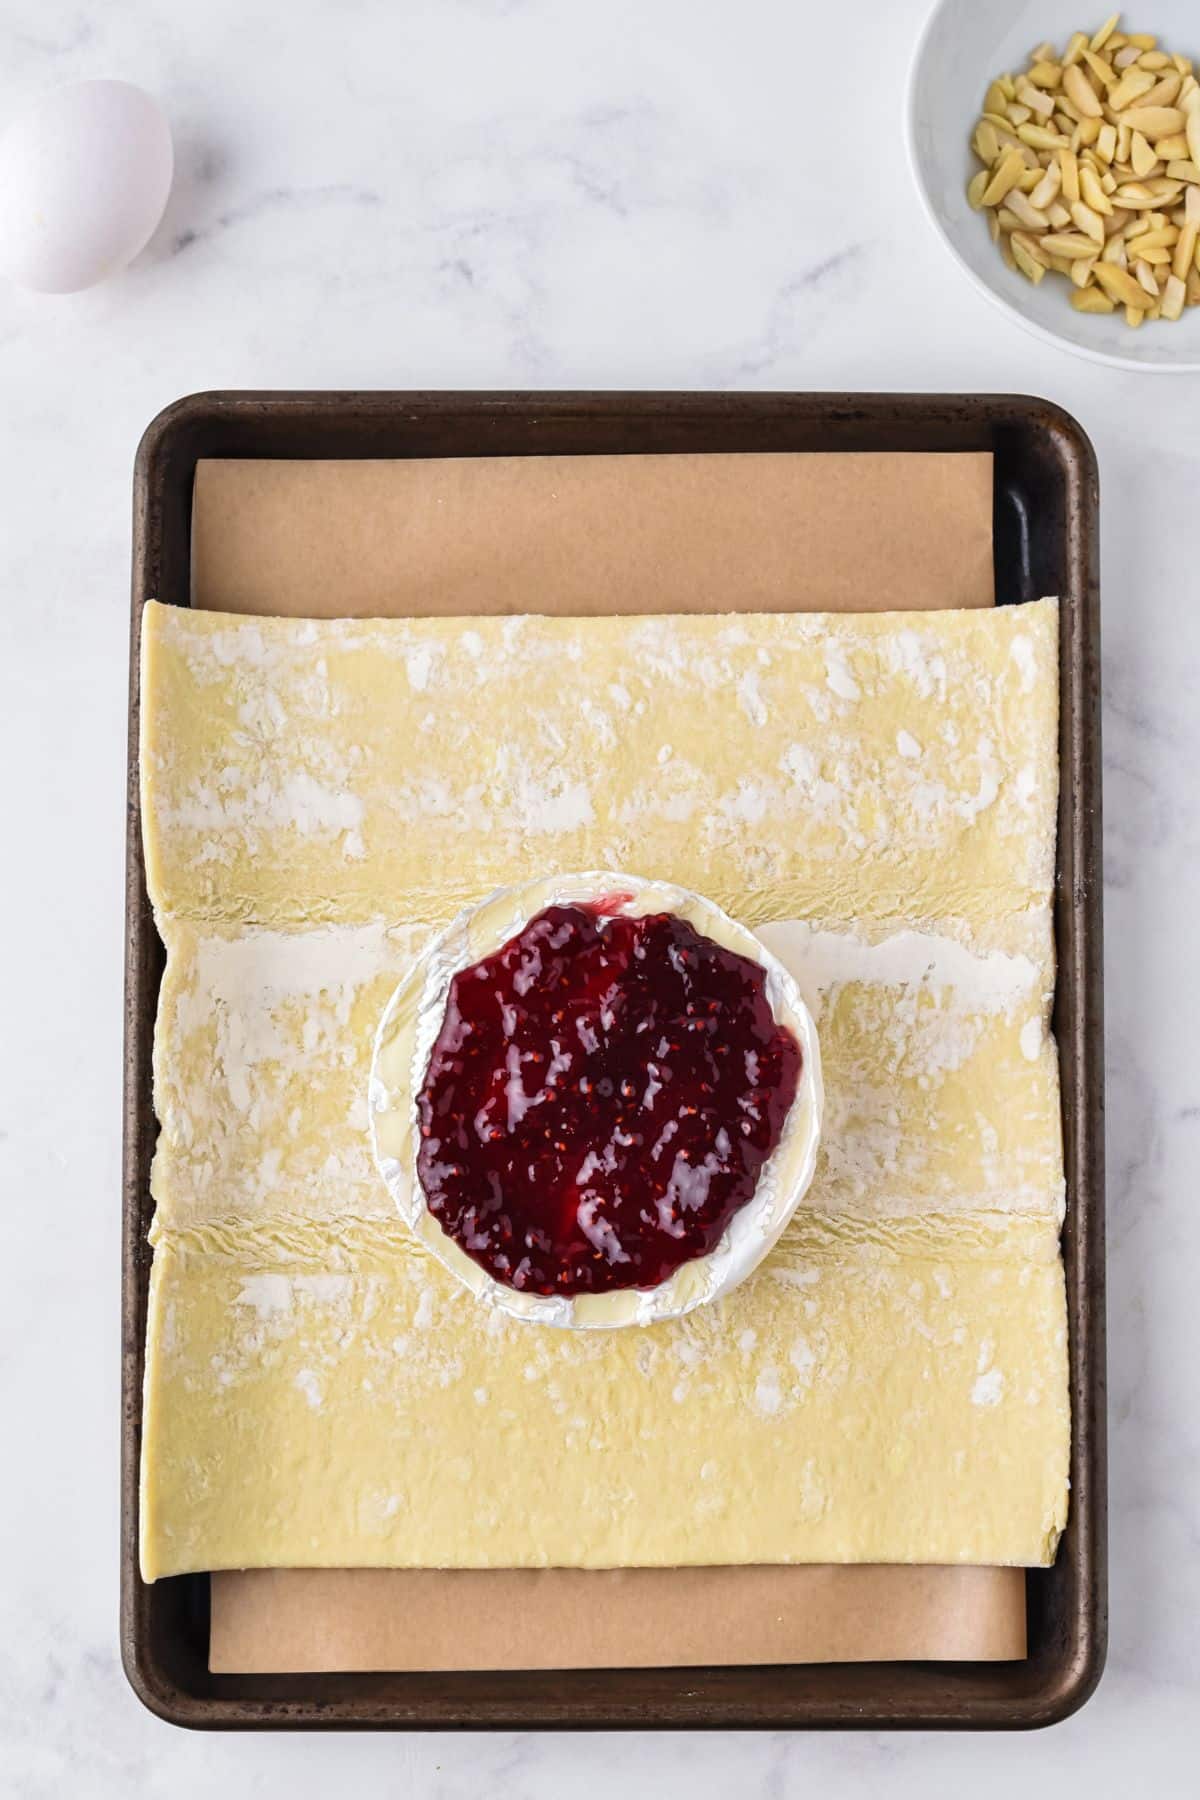 red jelly on top of brie wheel with puffed pastry under